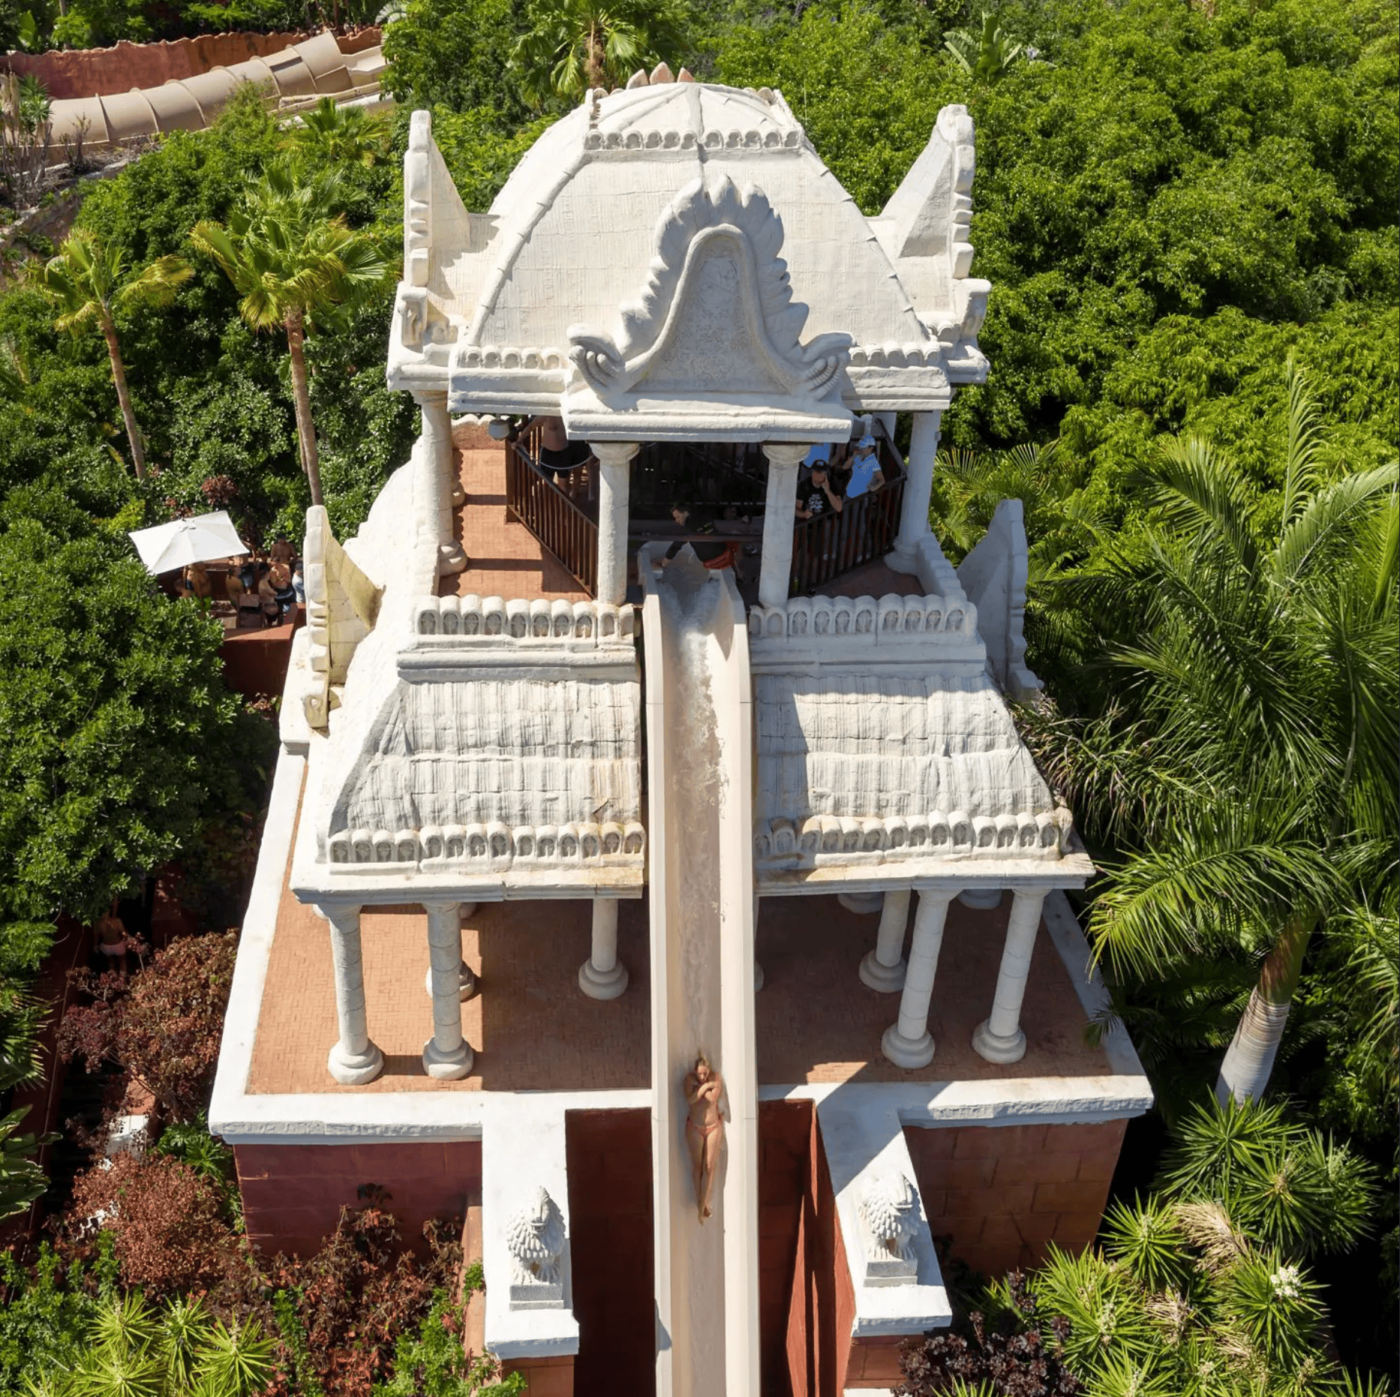 Siam park tower of power